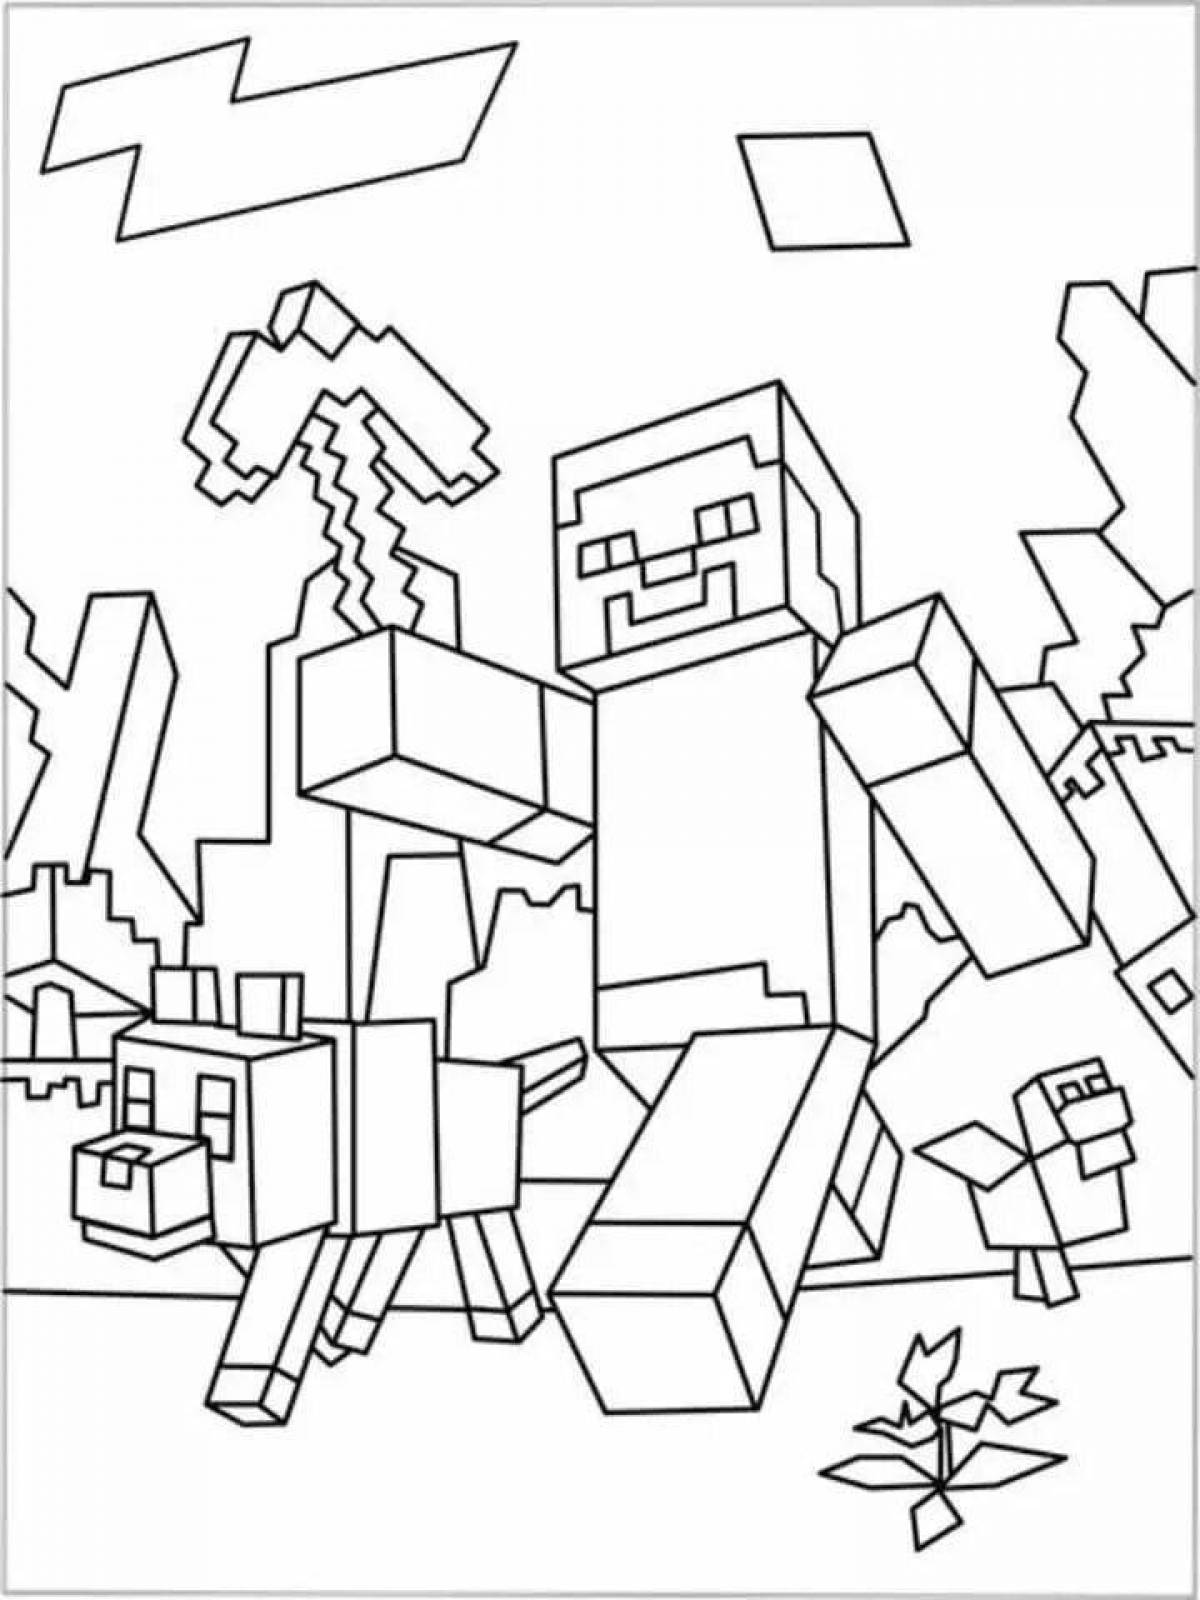 Minecraft character coloring page with crazy colors